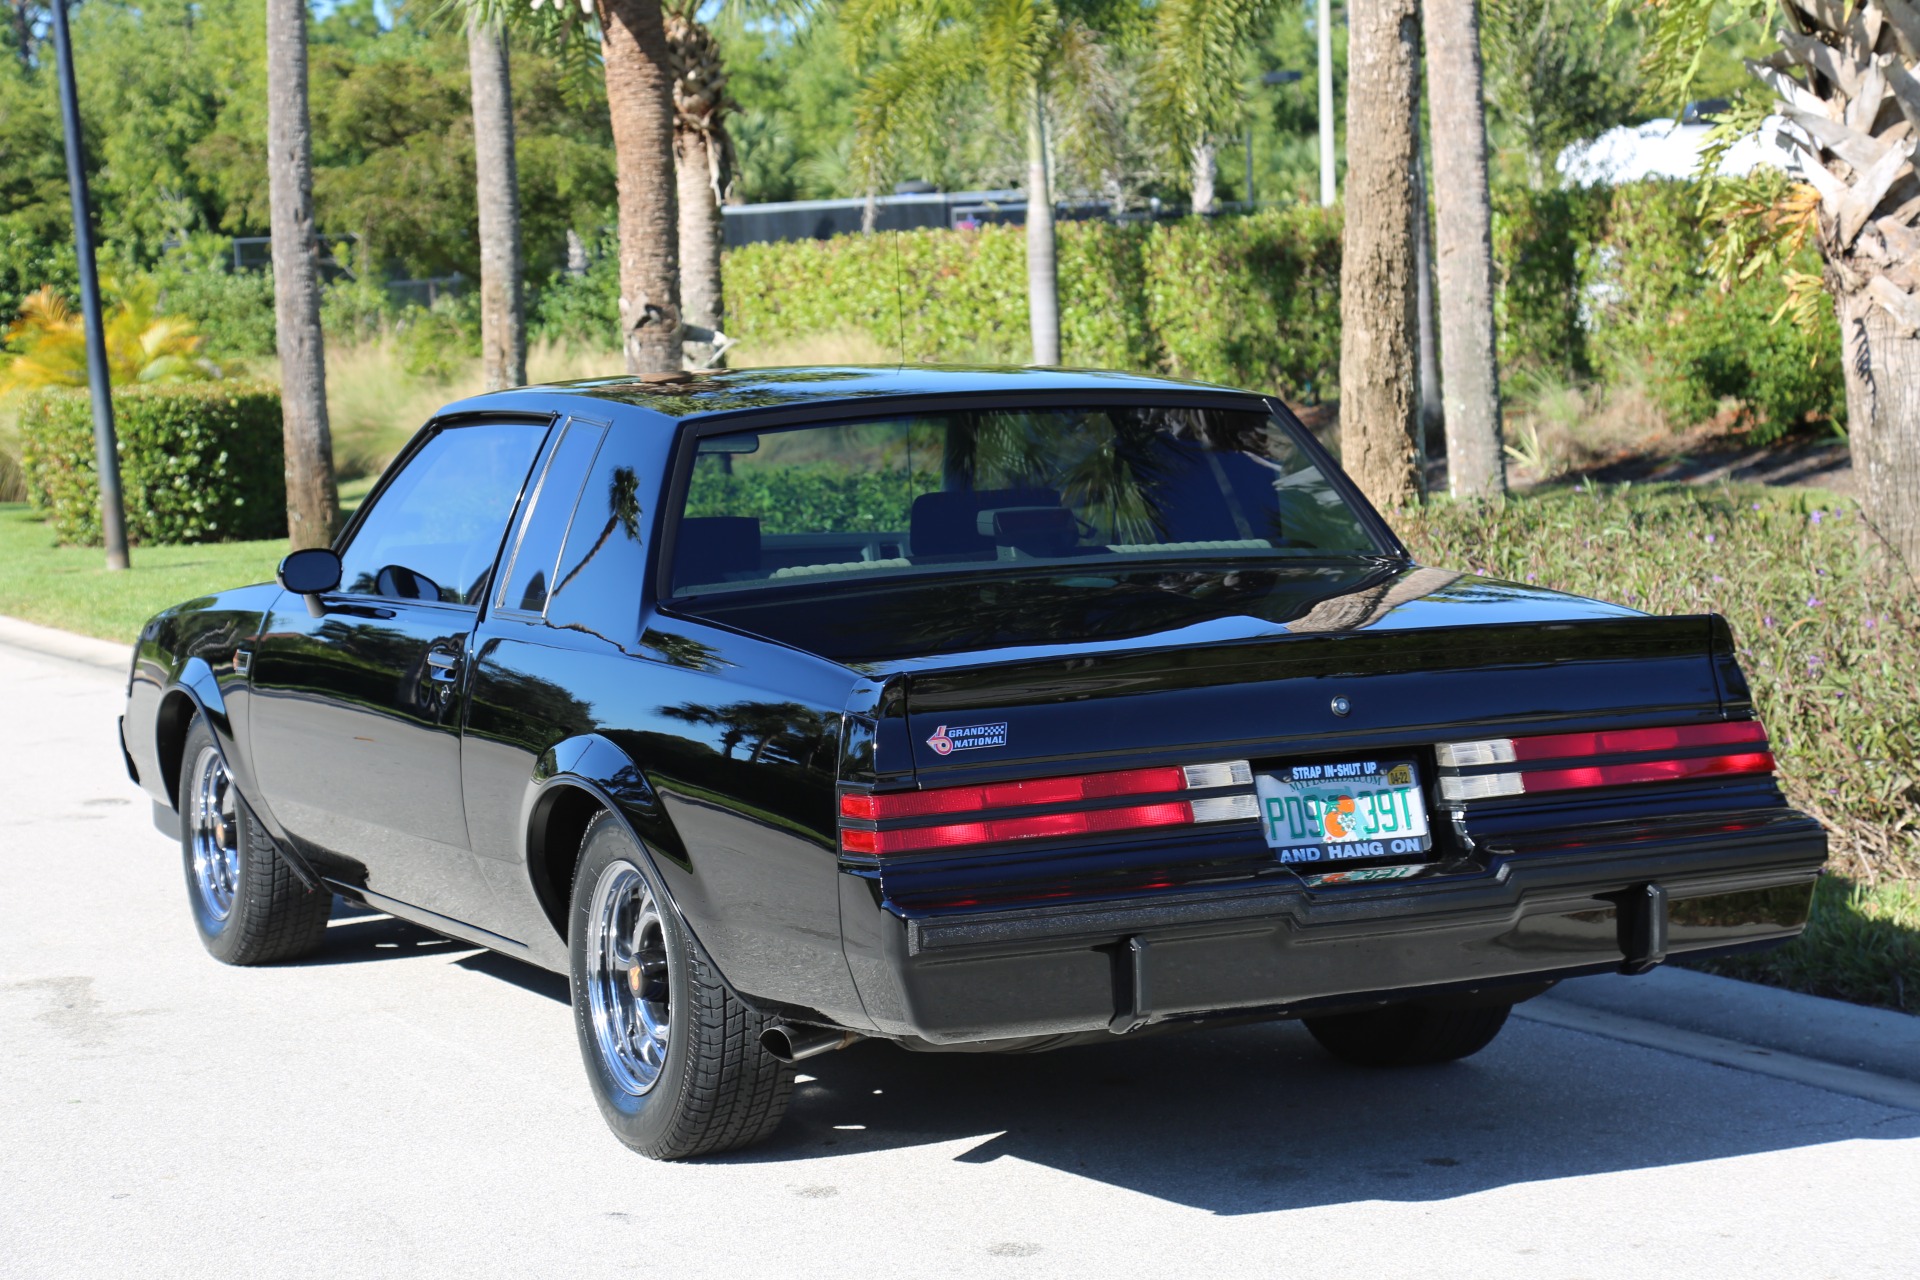 Used 1986 Buick Grand National Turbo Grand National Turbo for sale Sold at Muscle Cars for Sale Inc. in Fort Myers FL 33912 7